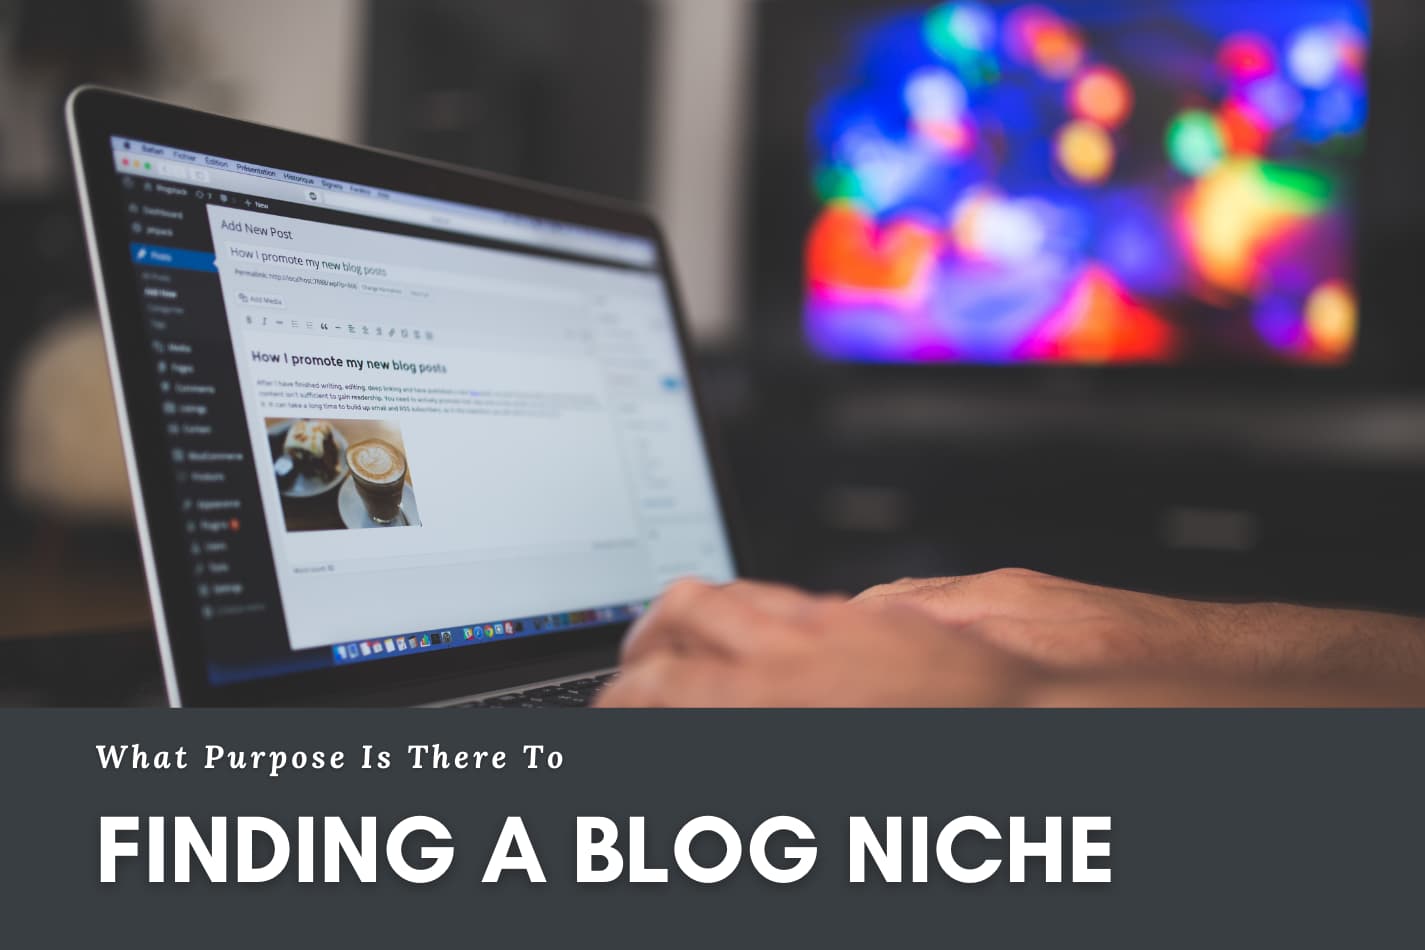 Niches: Why Finding the Right Blog Niche Matters